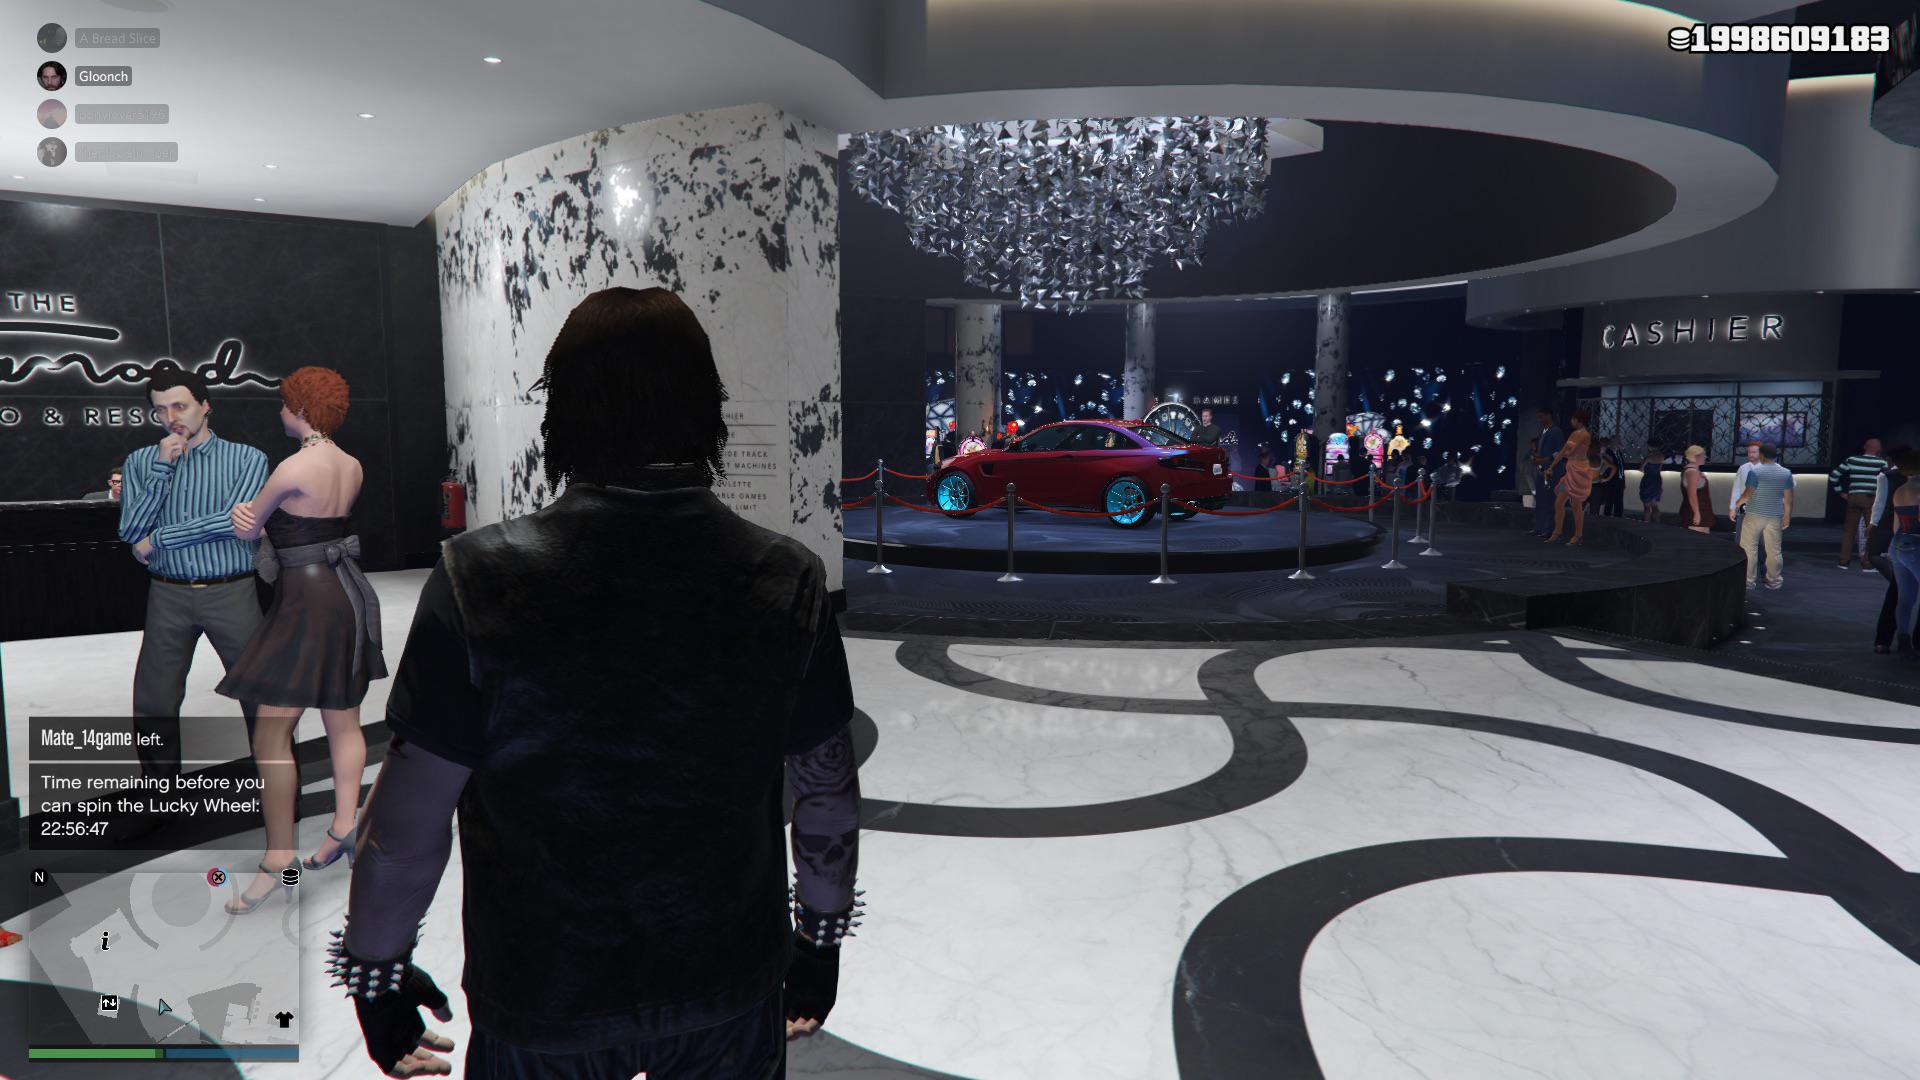 GTA 5 hacks make player a billionaire after retrieving locked account: a player walks into the casino in GTA 5